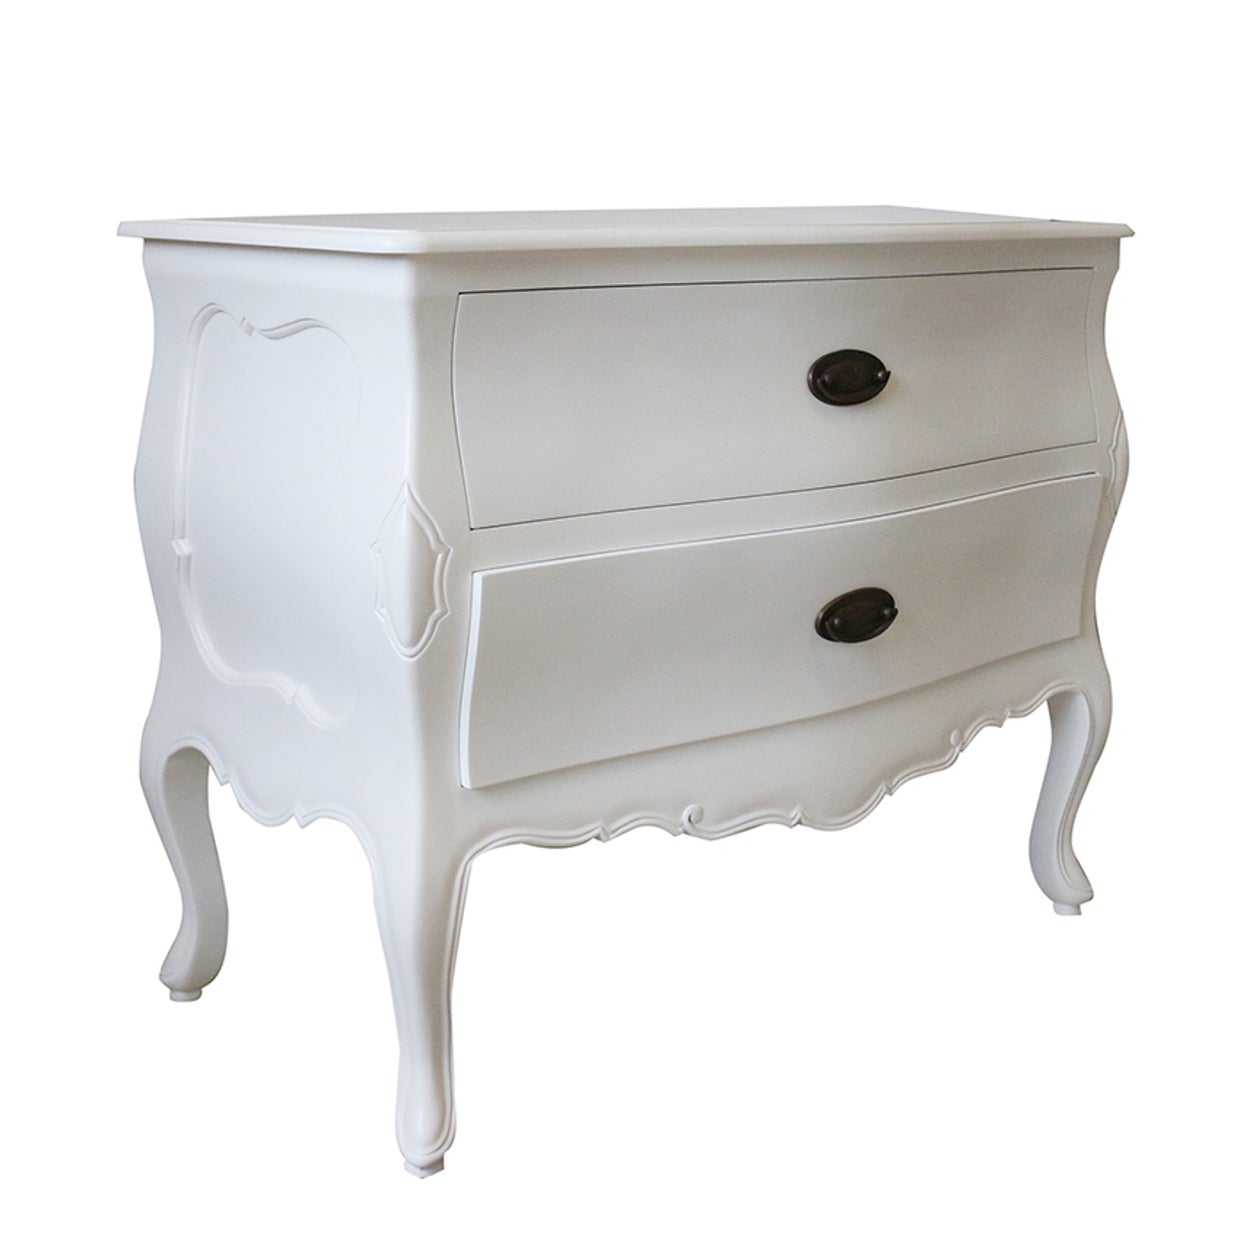 Commode Mahogany Chest of Drawers in Antique White Paint Finish